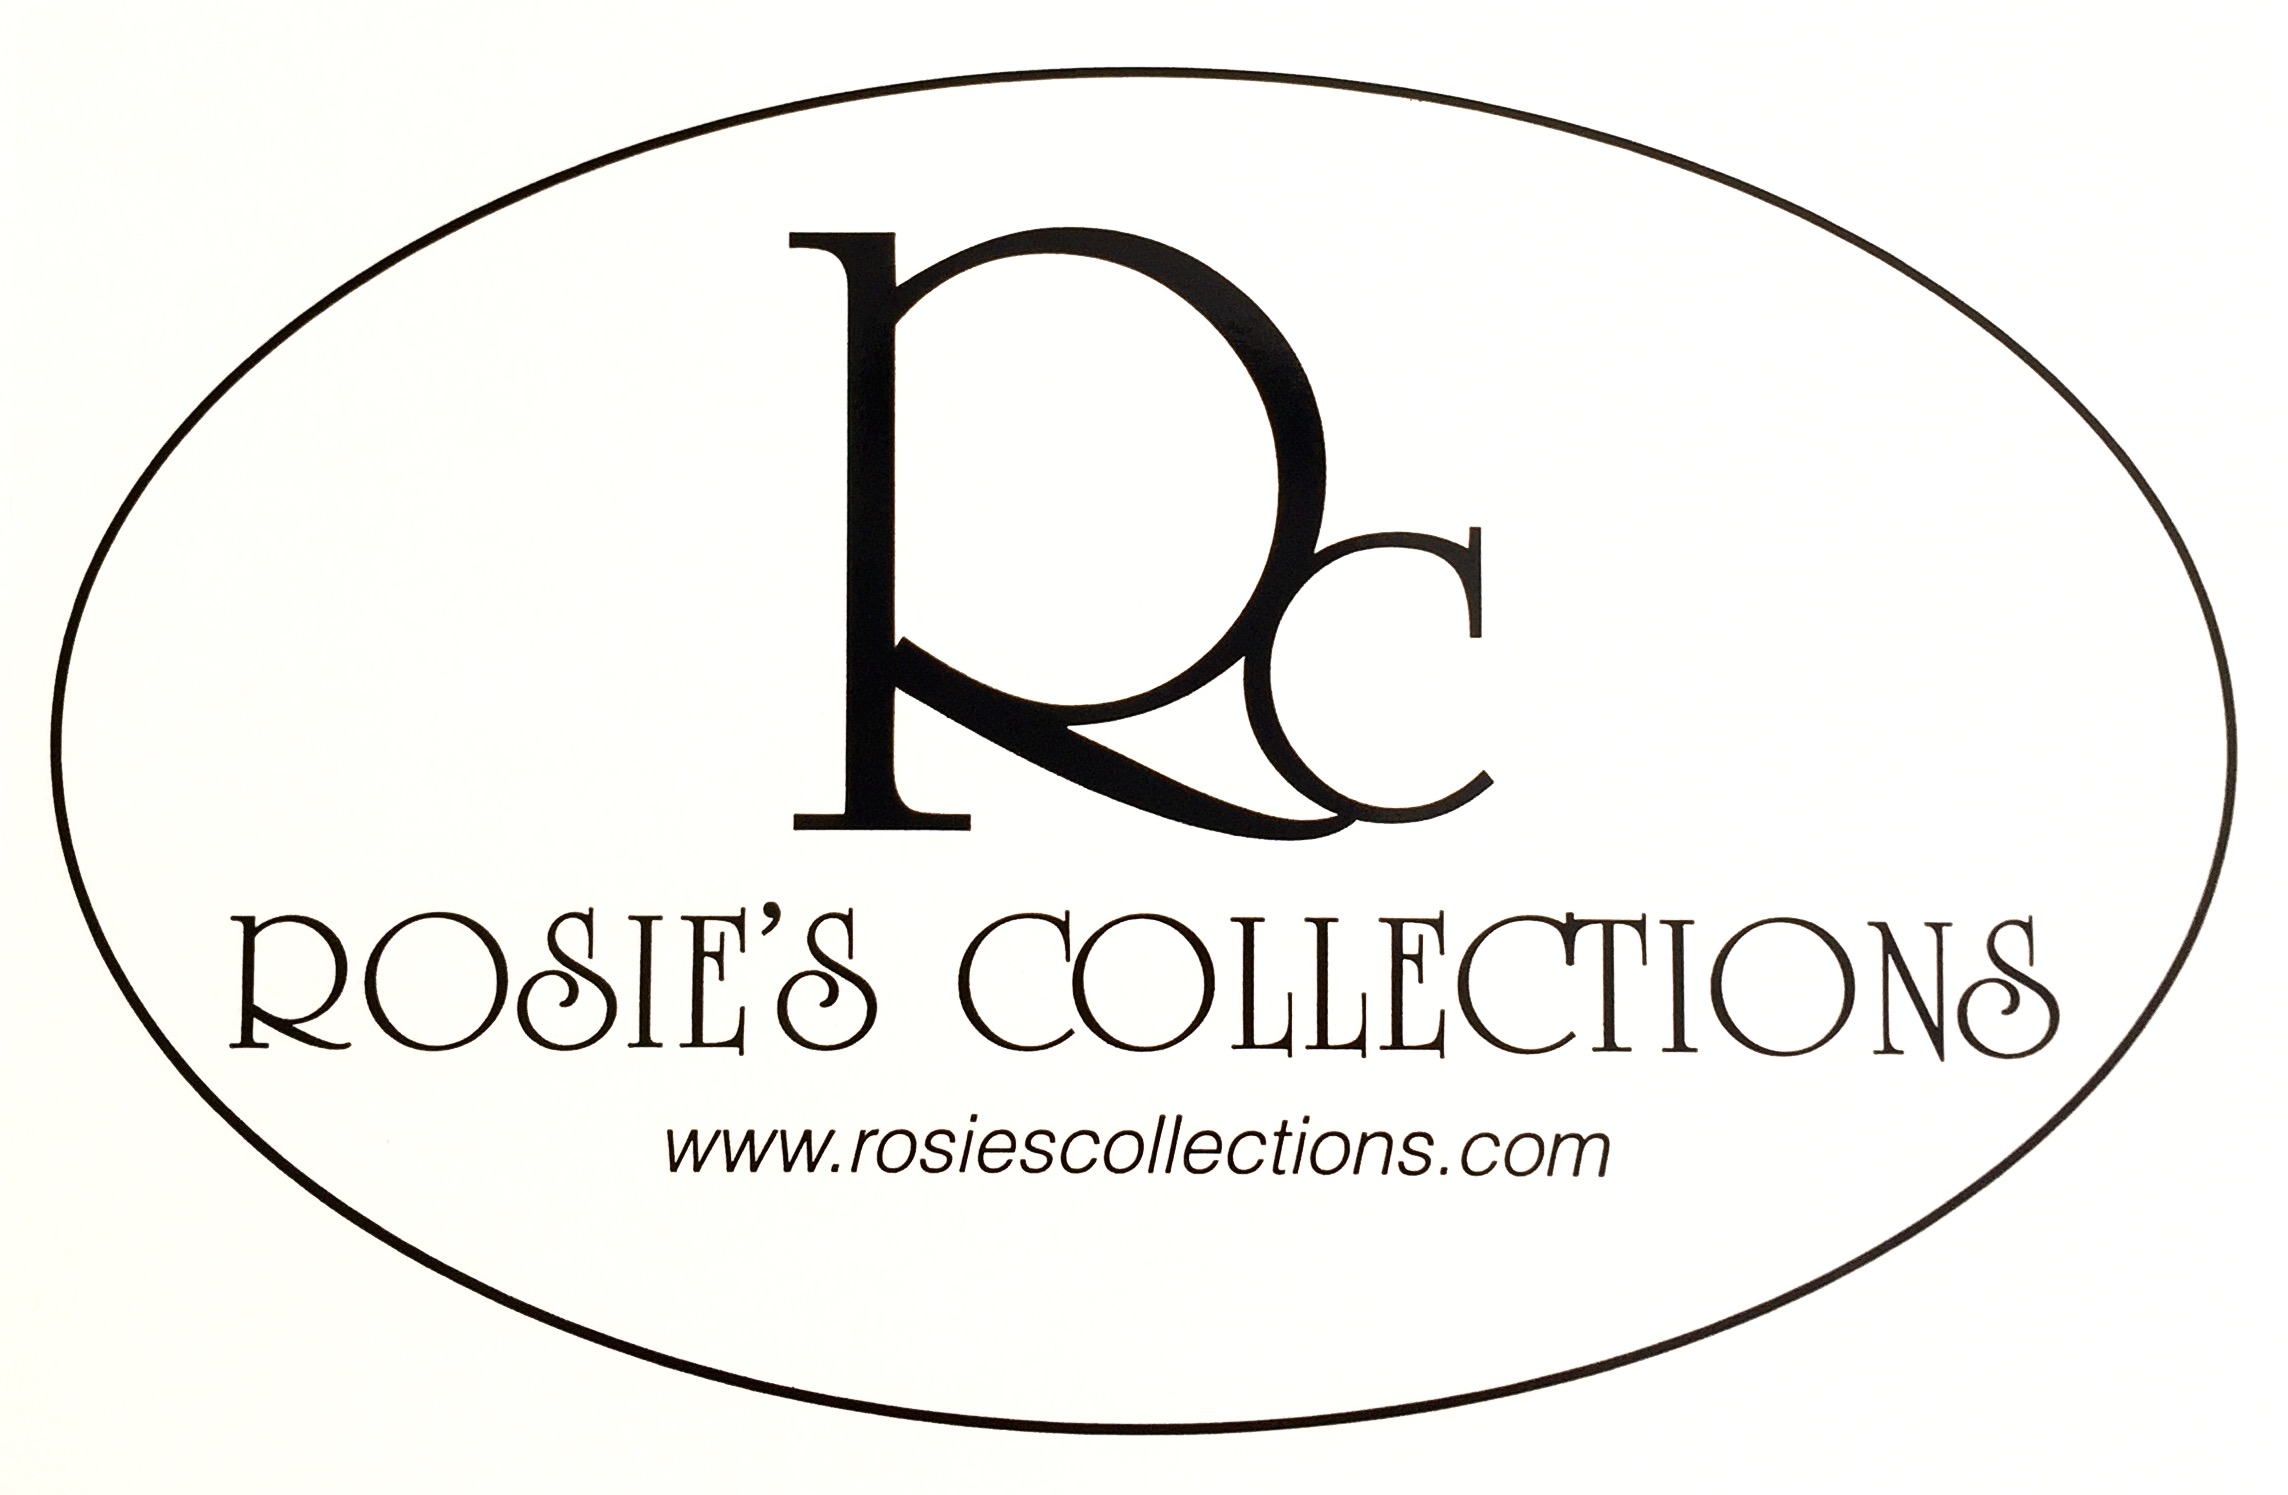 ROSIES COLLECTIONS